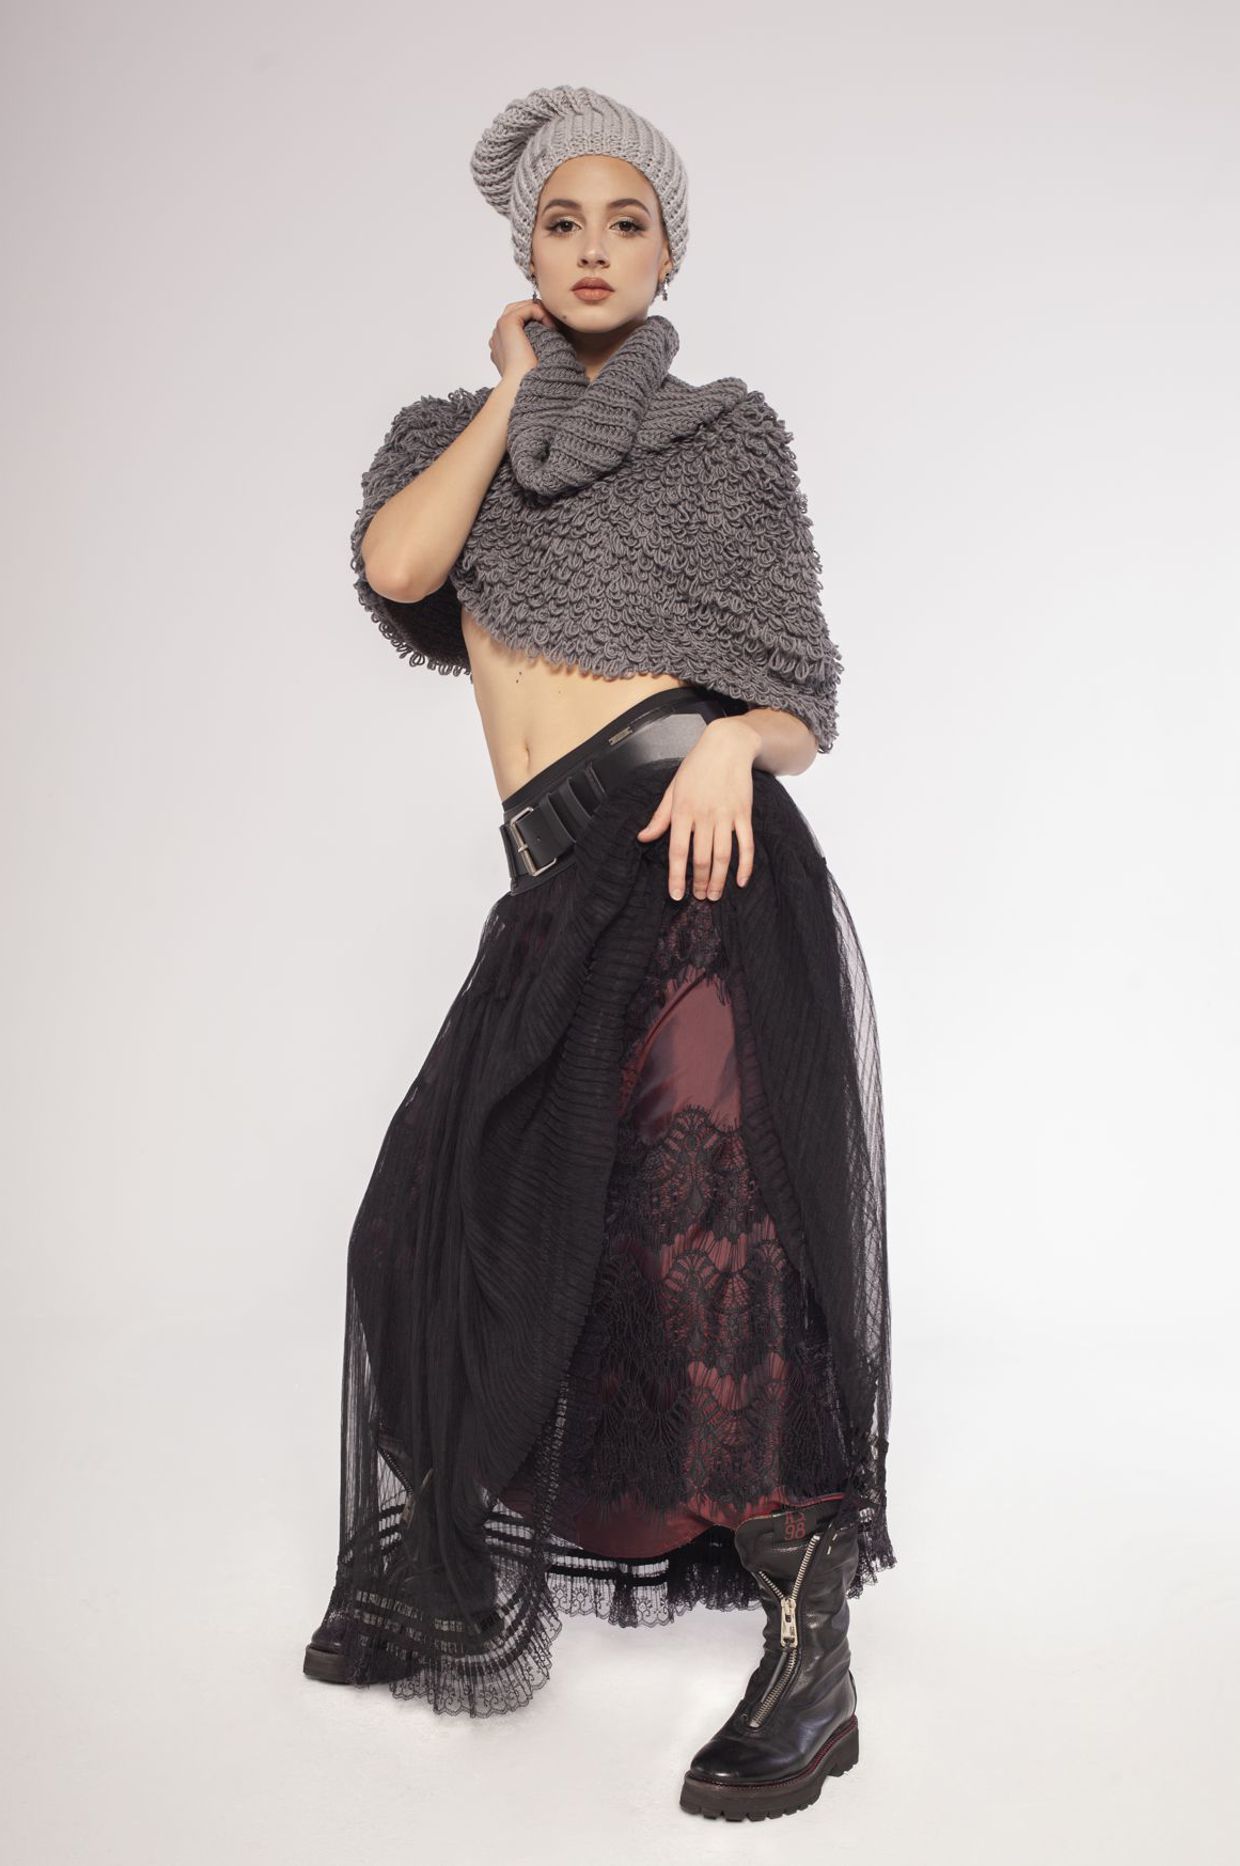 maxi skirt made of tulle and leather, tulle skirt with leather yoke and belt, maxi skirt with yoke and belt made of Italian leather, long skirt with yoke made of natural leather and pleated tulle, black maxi skirt, j premium maxi skirt, maxi skirt, skirt by rieske